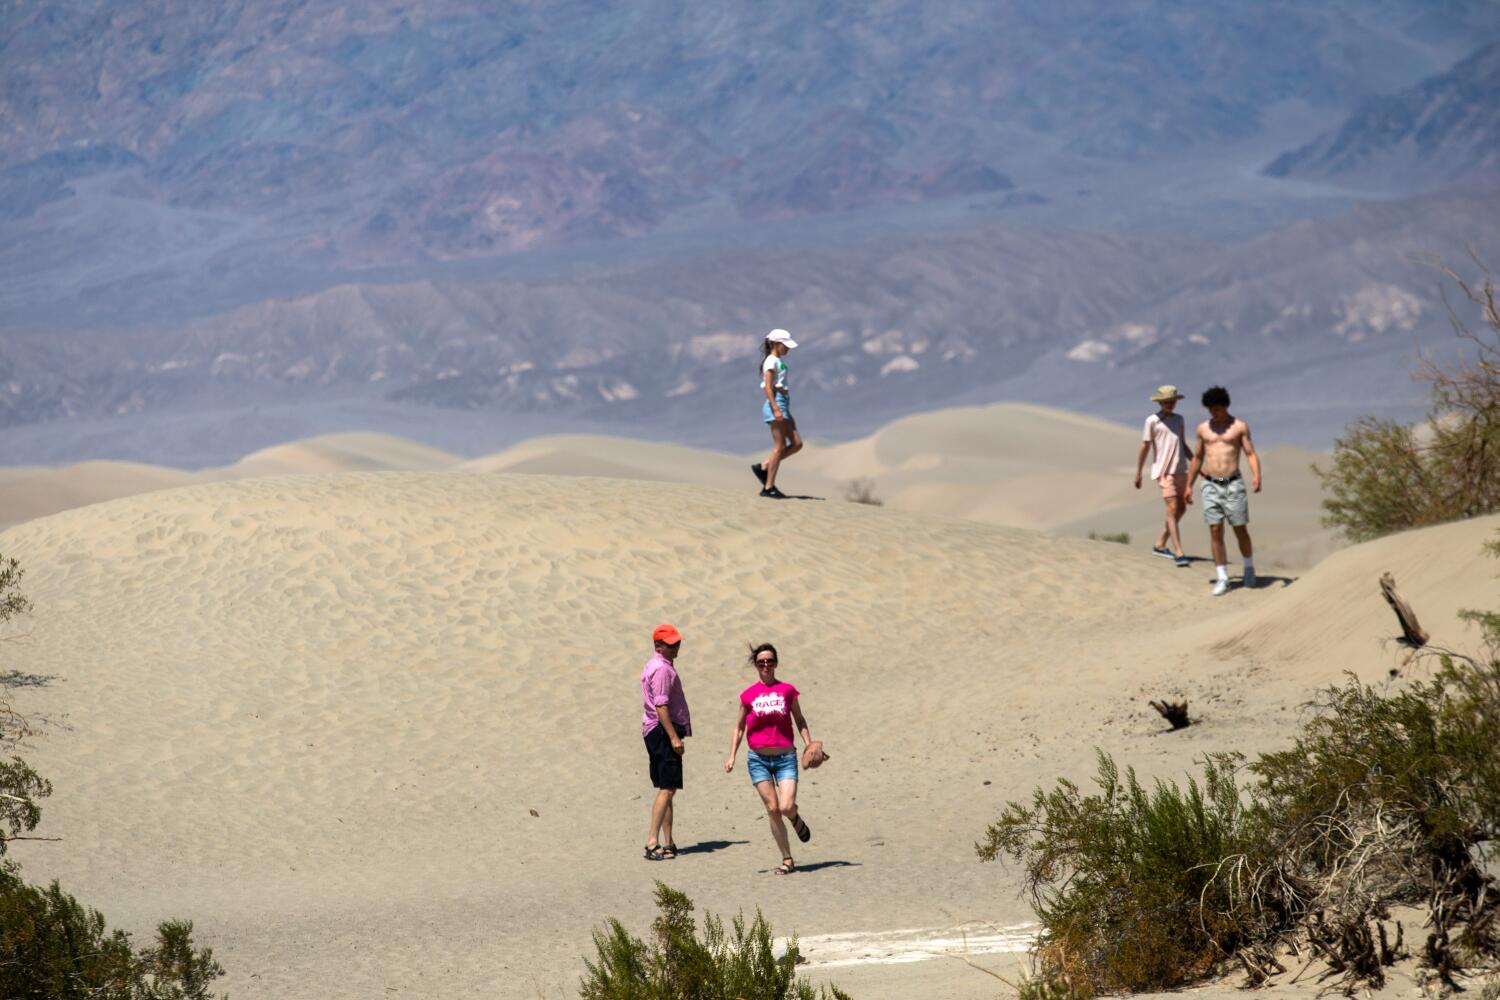 Motorcycle tour of Death Valley turns fatal as thermometer cracks 128 degrees